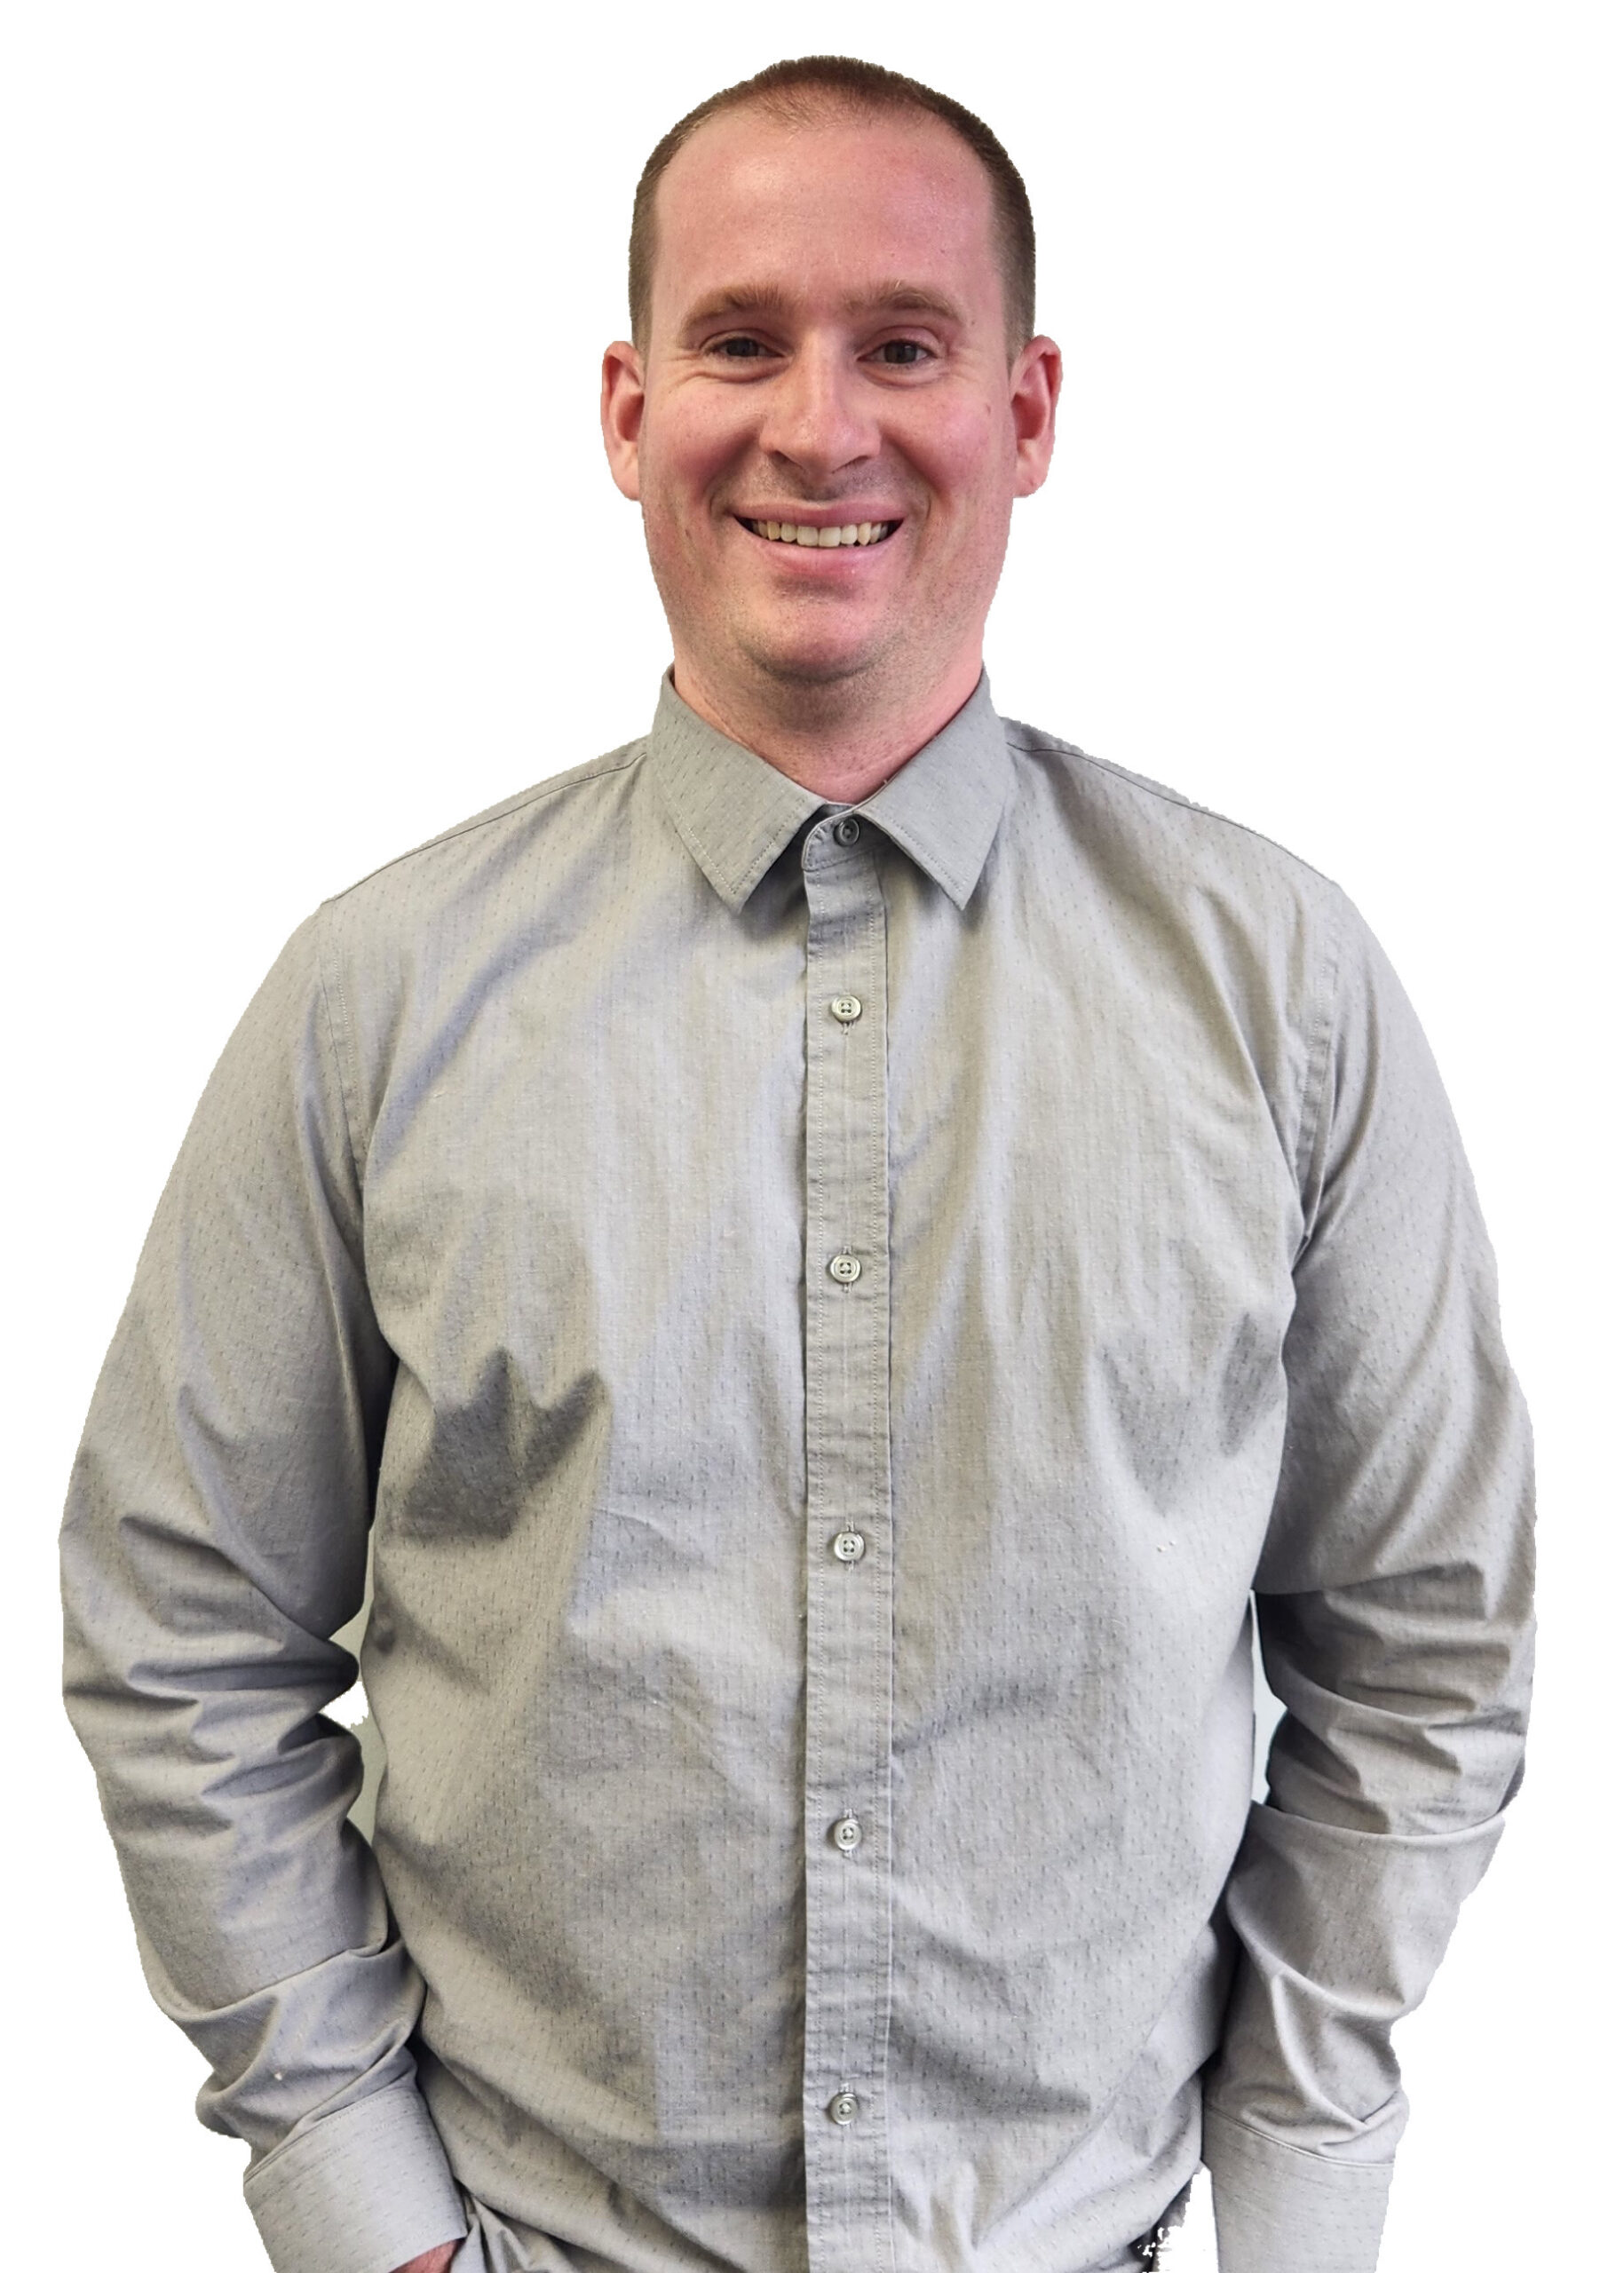 Portrait of Daniel Lawler, Project Manager at Ransom Consulting.